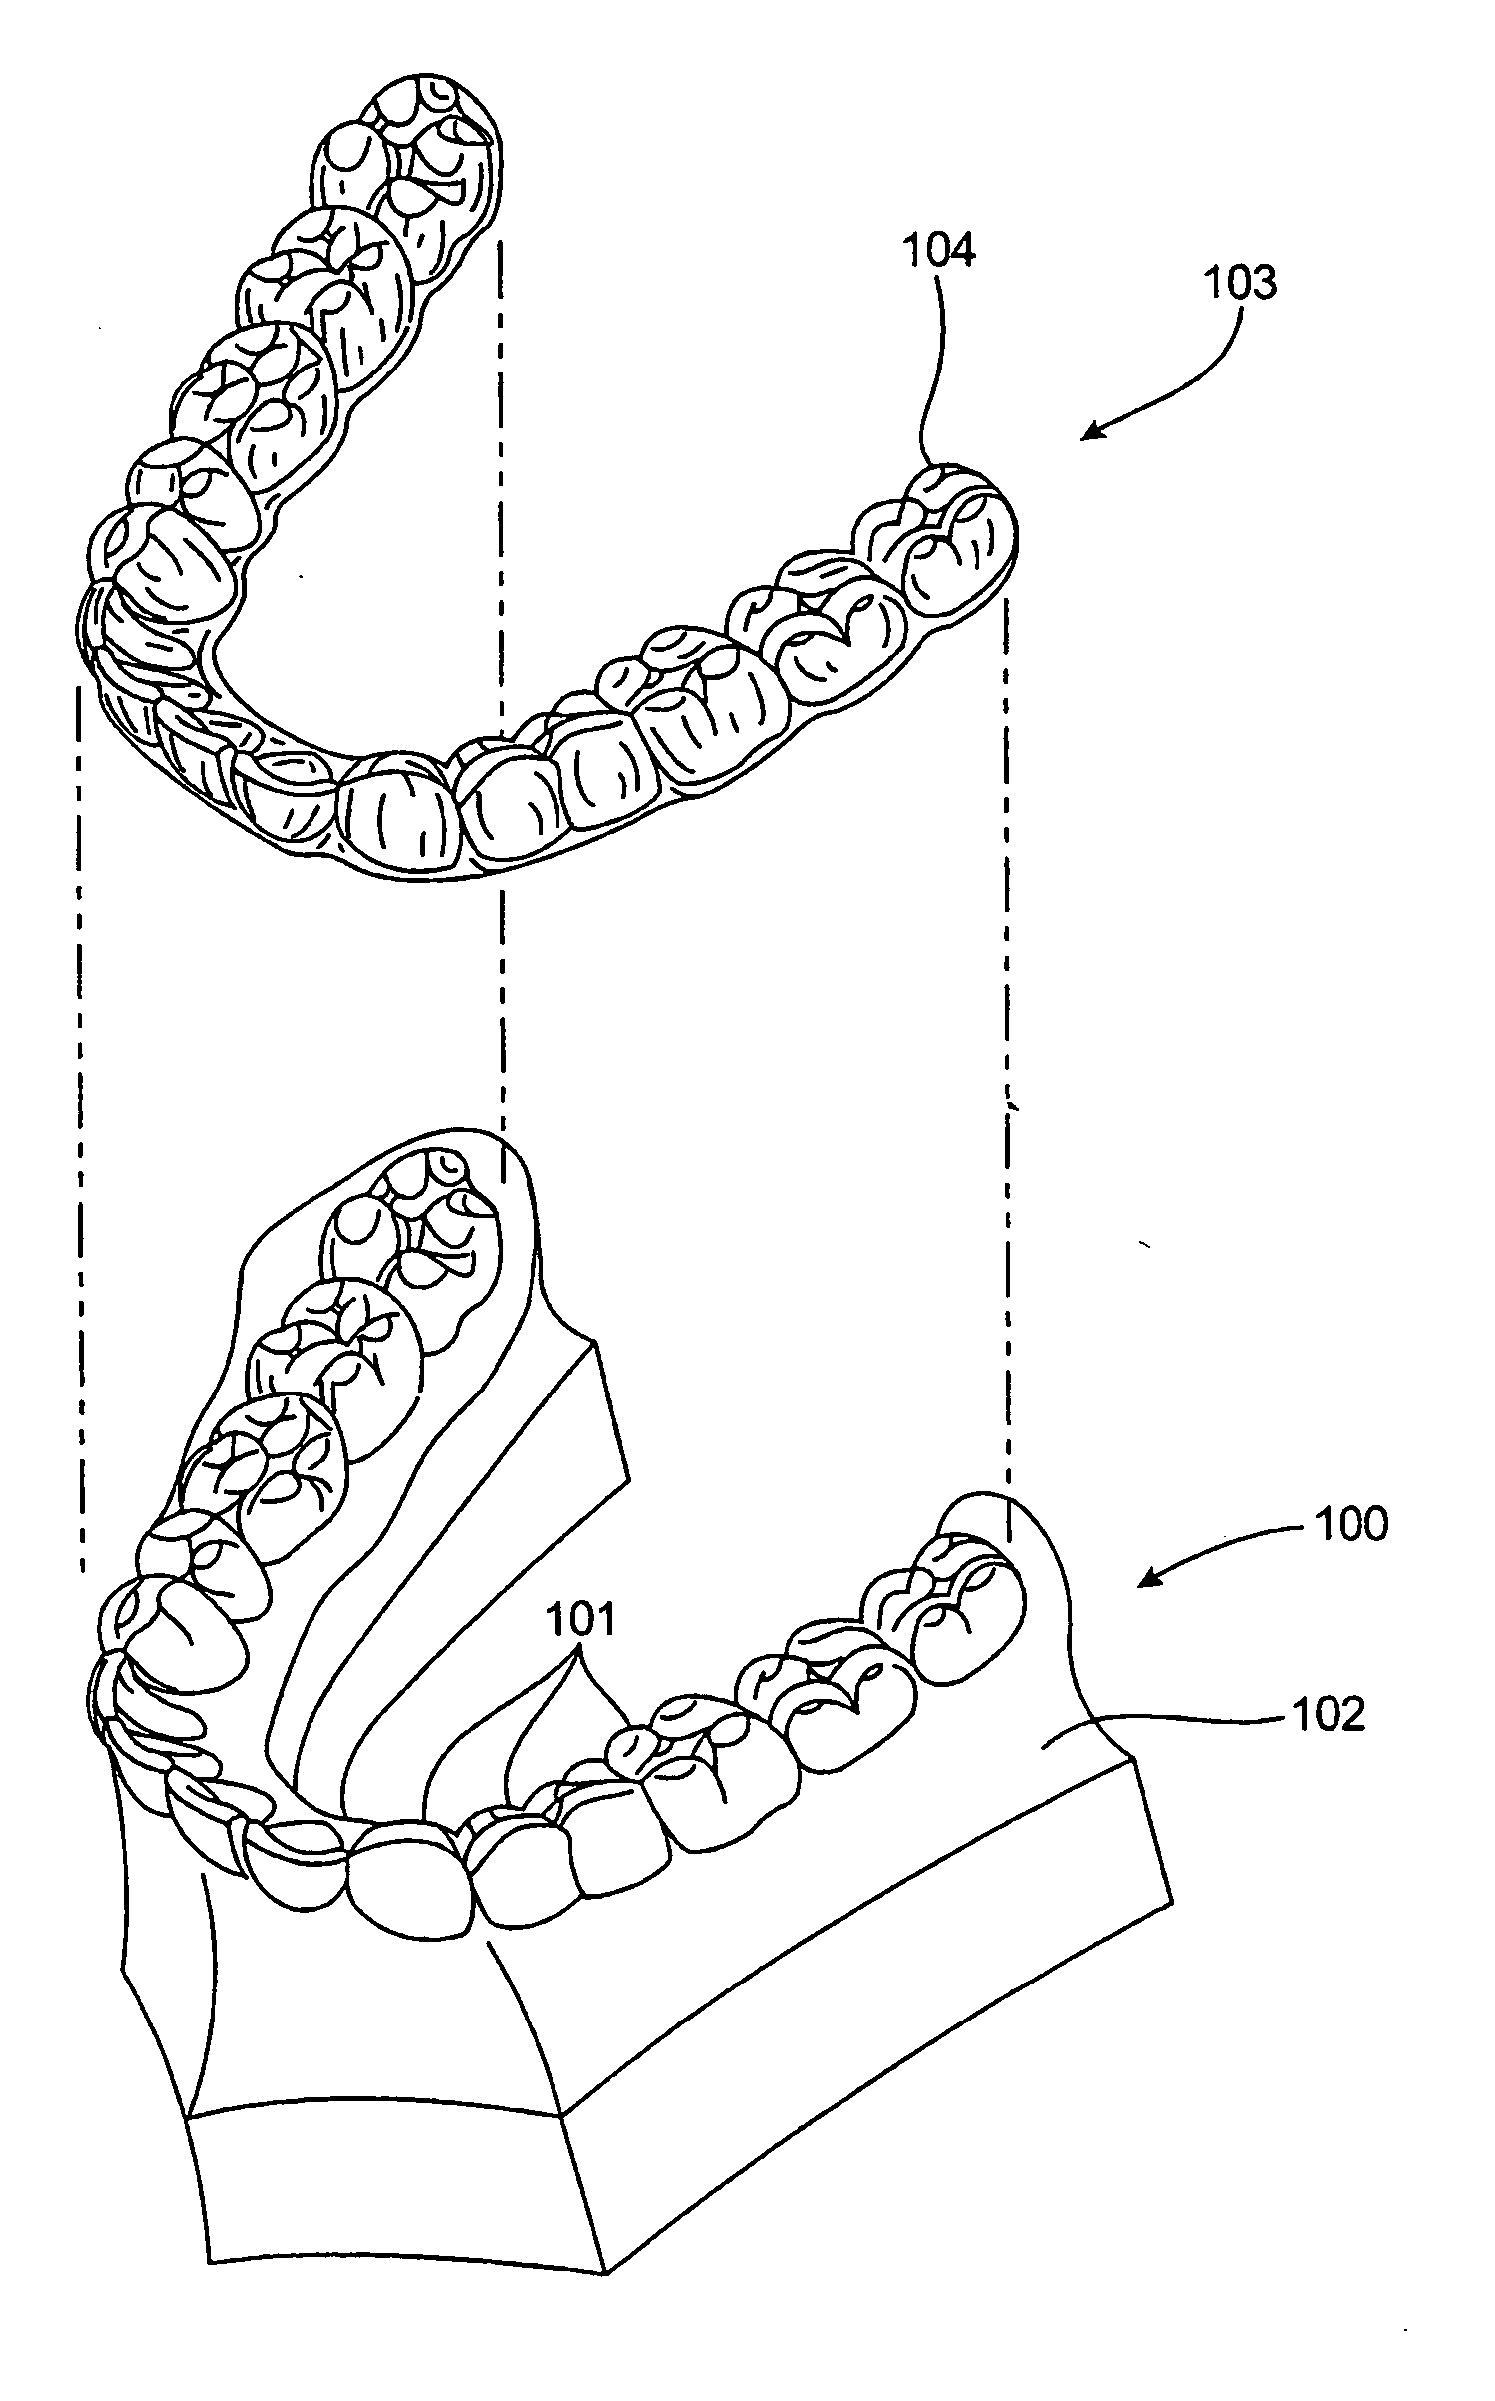 Methods for correcting tooth movements midcourse in treatment